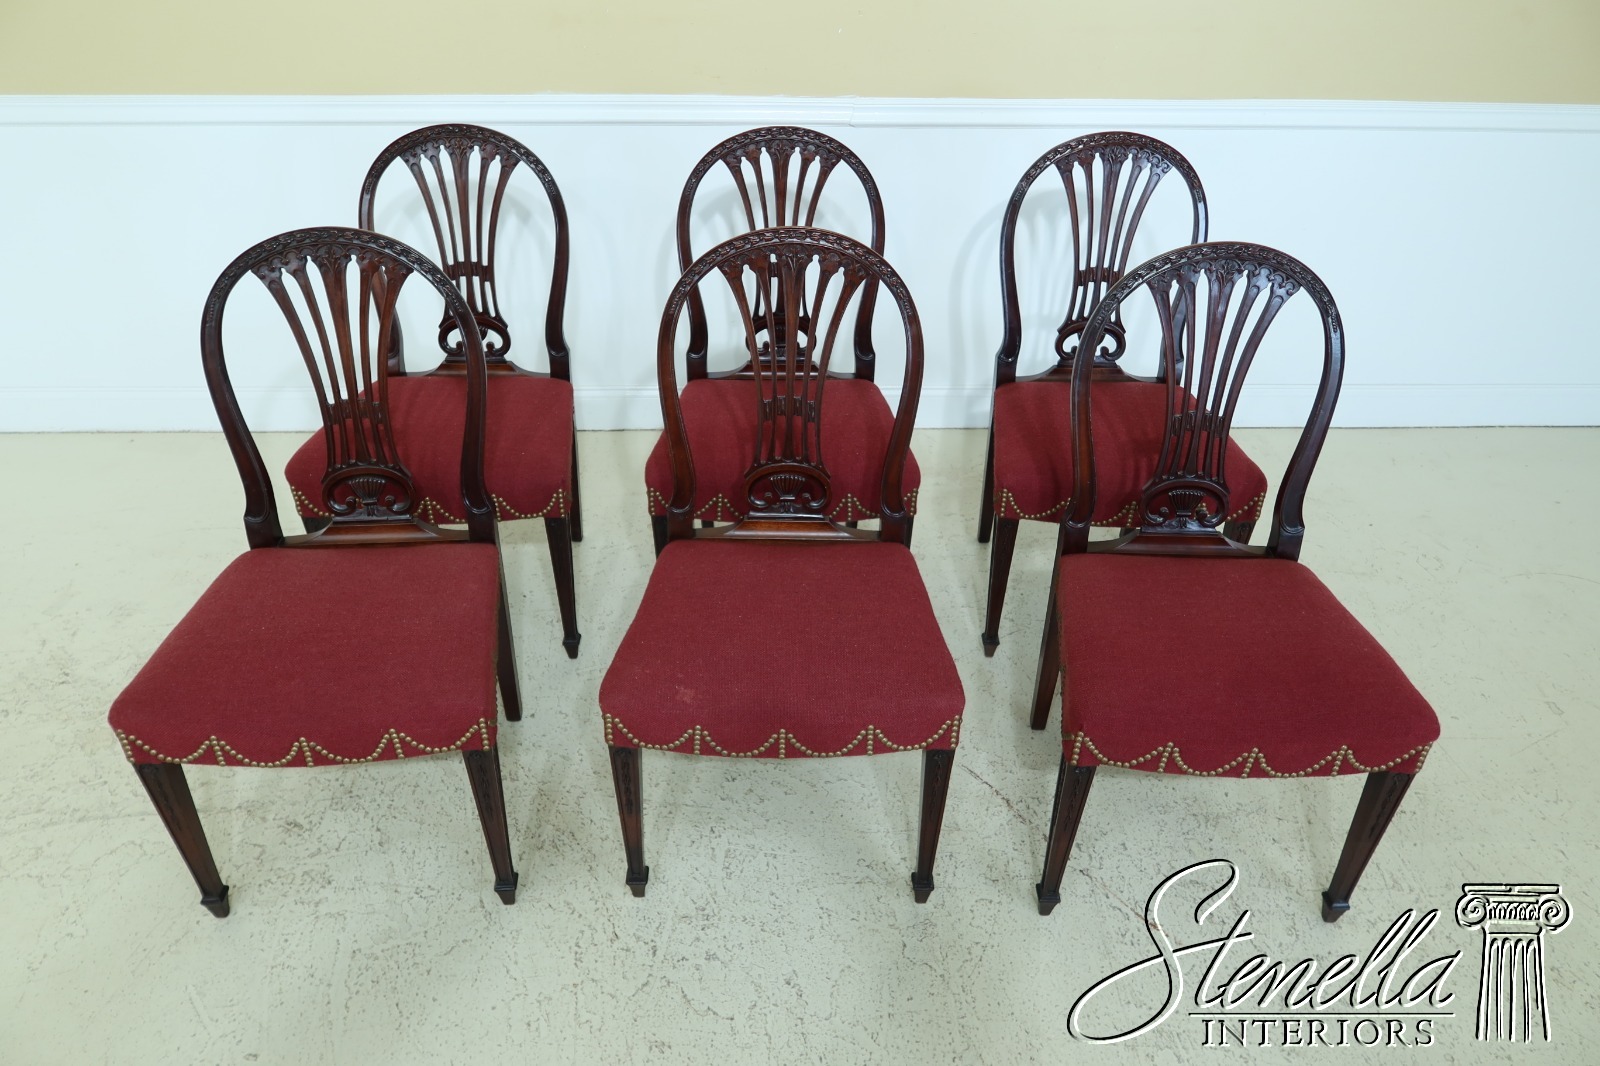 LF22995EC: Set Of 6 Vintage 1930s Federal Carved Dining Room Chairs | eBay